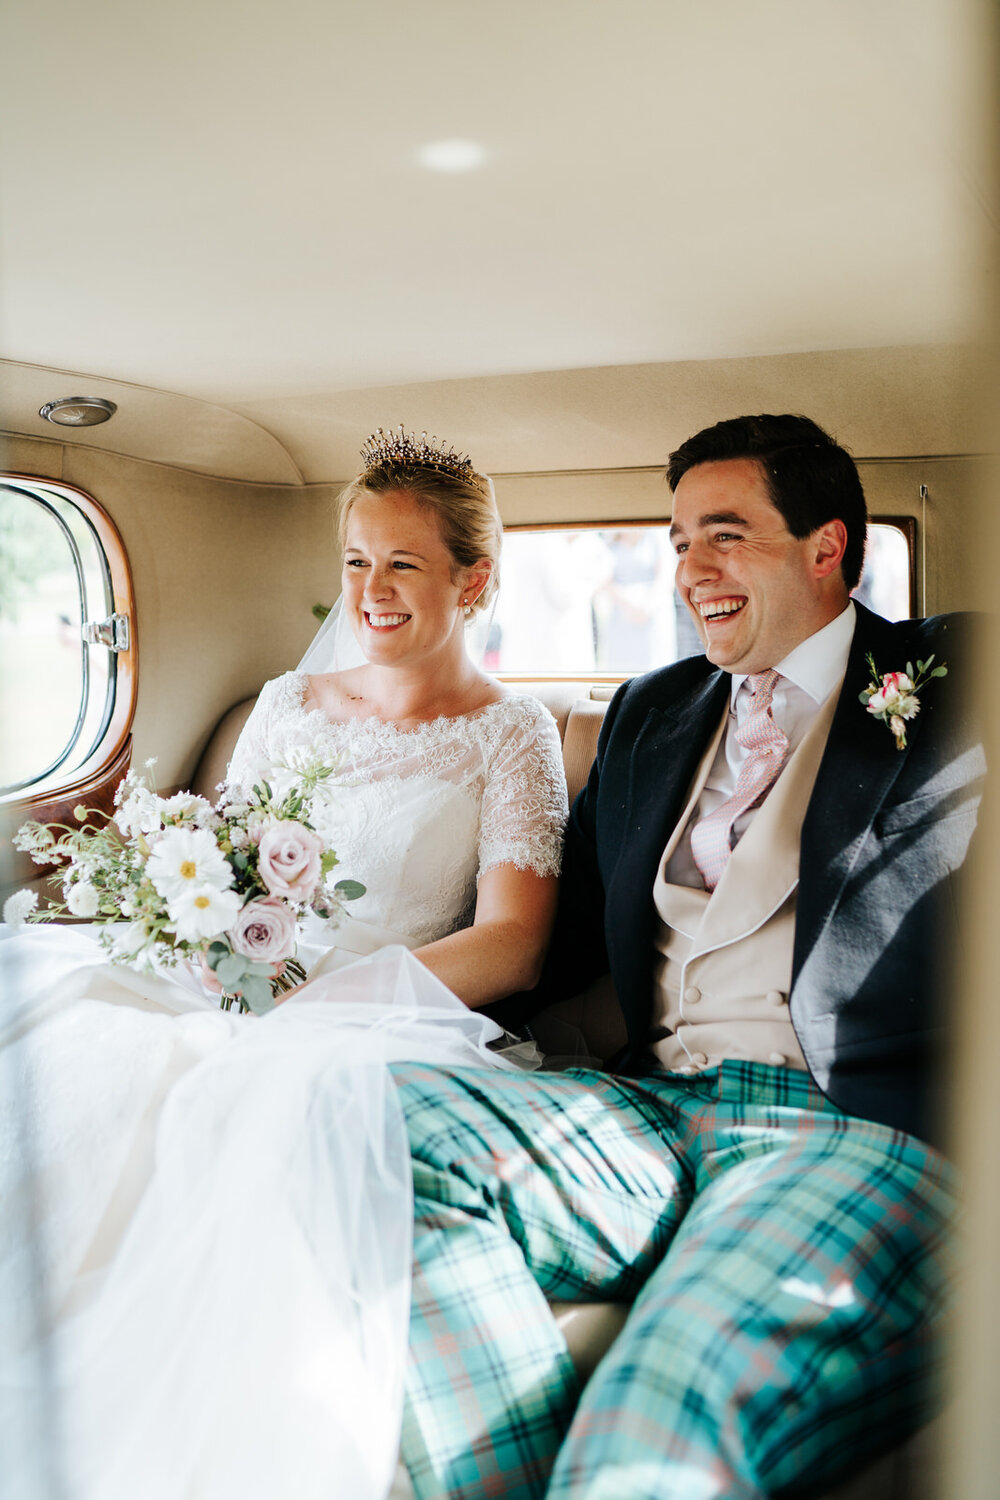 Bride and groom sit inside car right after wedding ceremony and smile with excitement